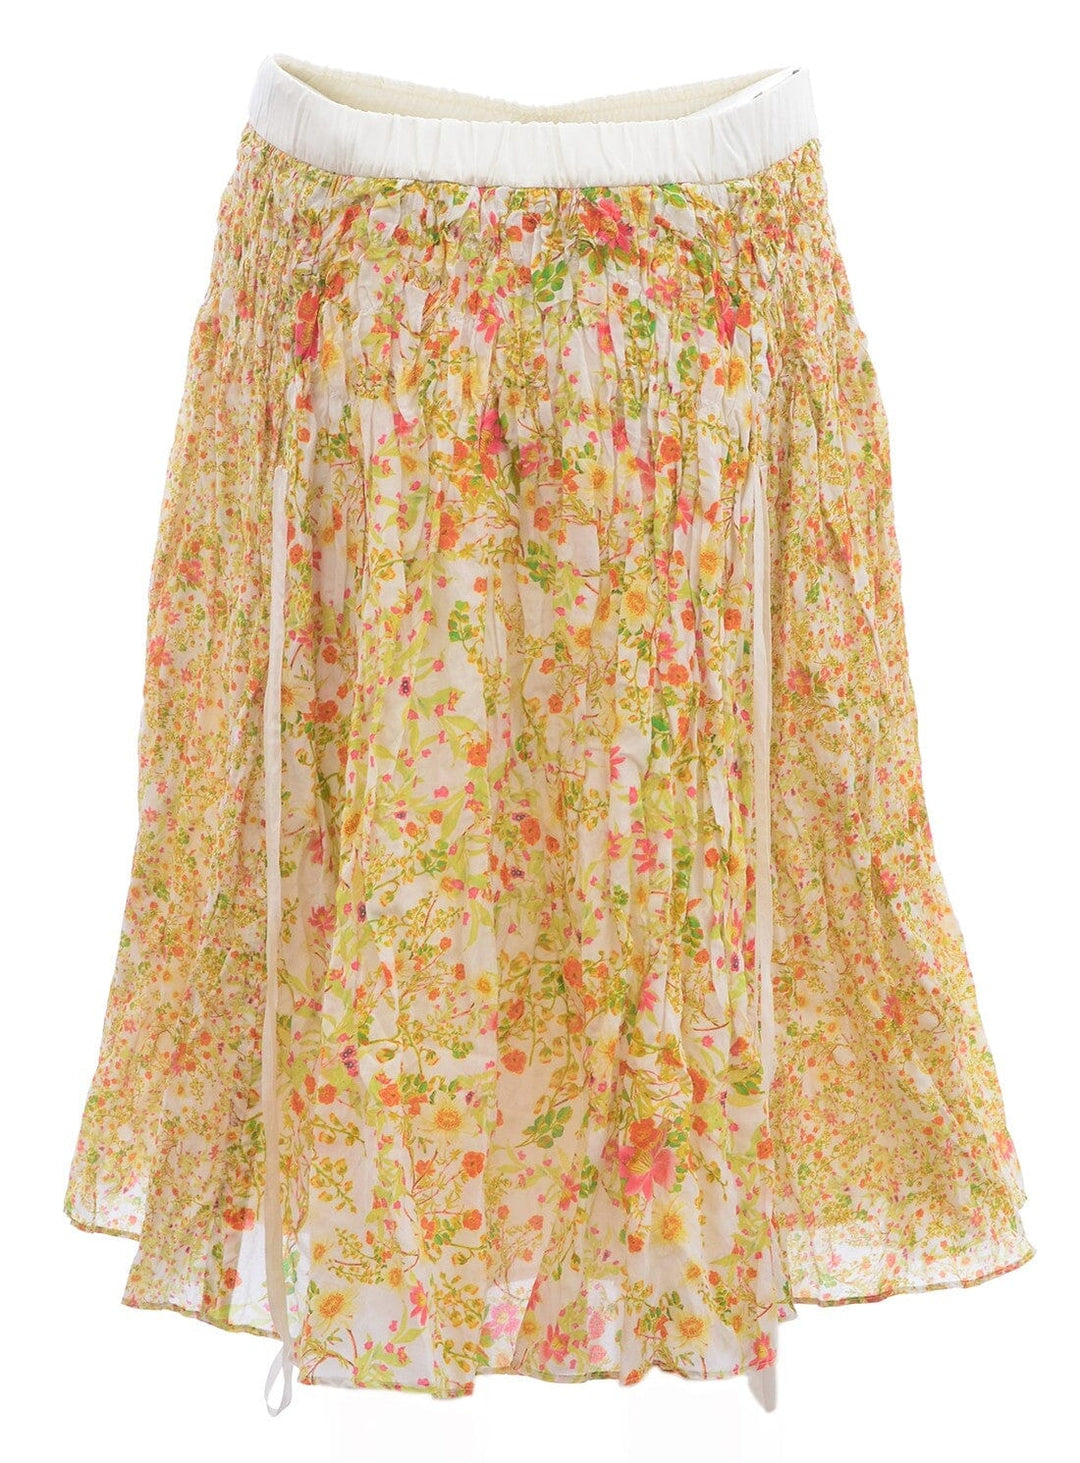 Ditsy Silk and Cotton Floral Skirt Skirts YBDFinds 